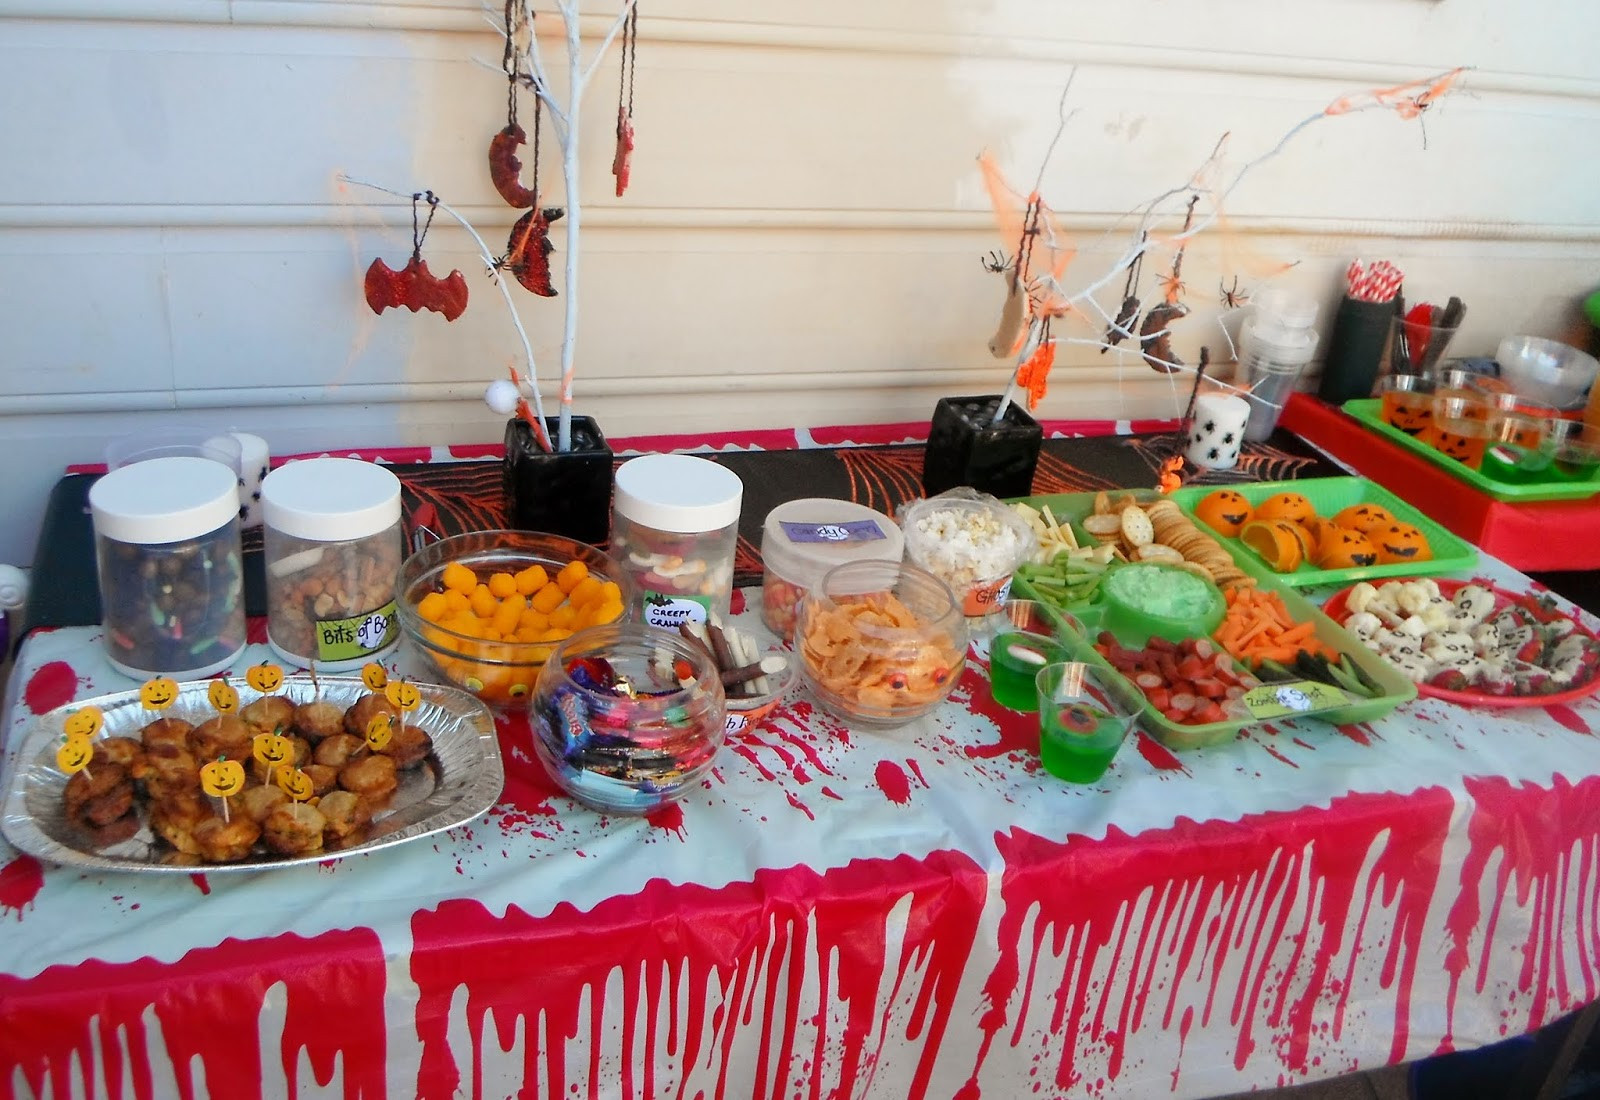 Childrens Halloween Birthday Party Ideas
 Adventures at home with Mum Halloween Party Food